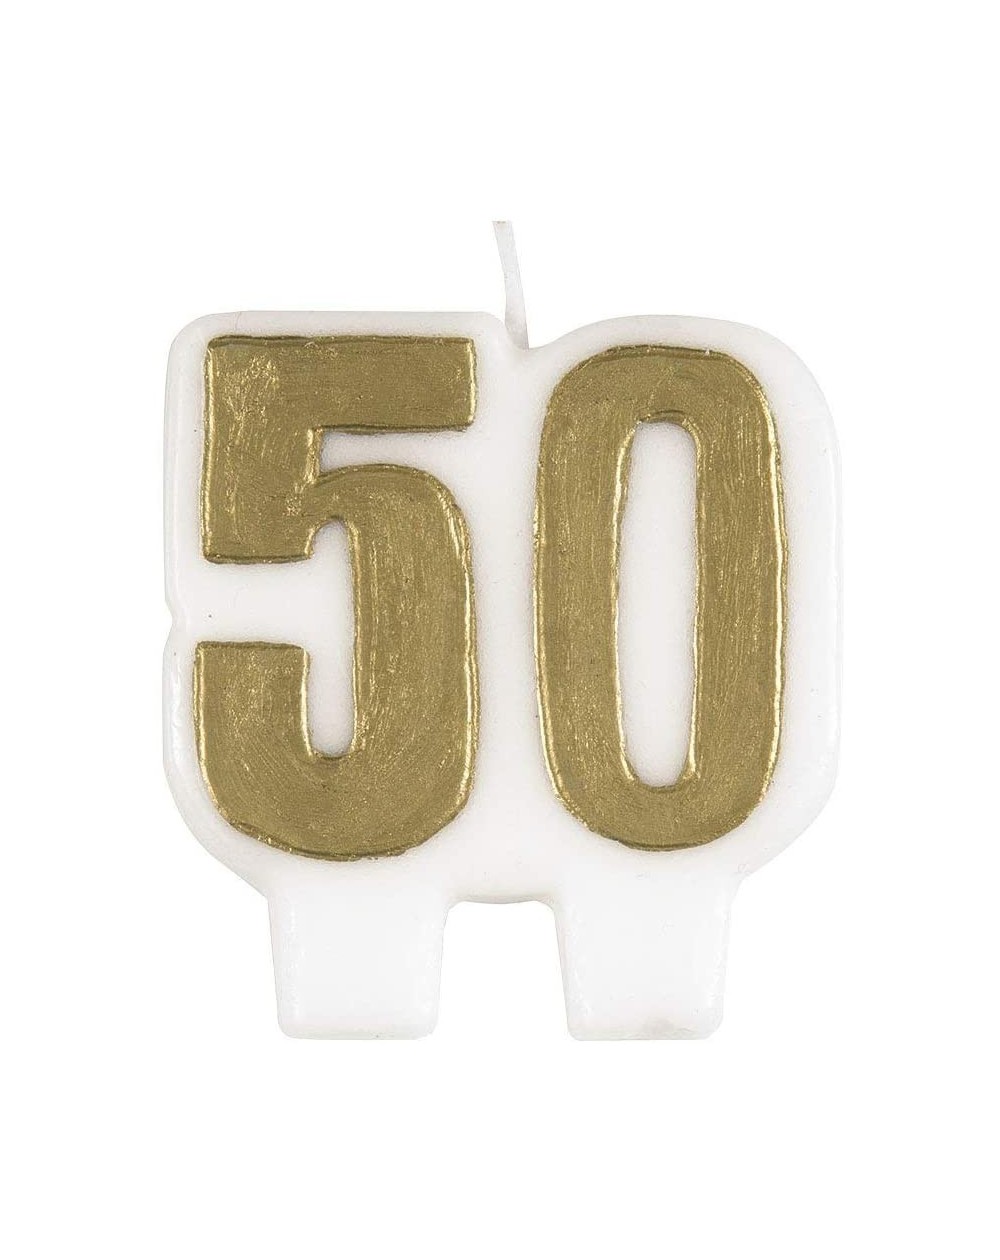 Cake Decorating Supplies Gold Number 50 Birthday Candle - Gold 50th Birthday - CI11YQFI973 $7.45